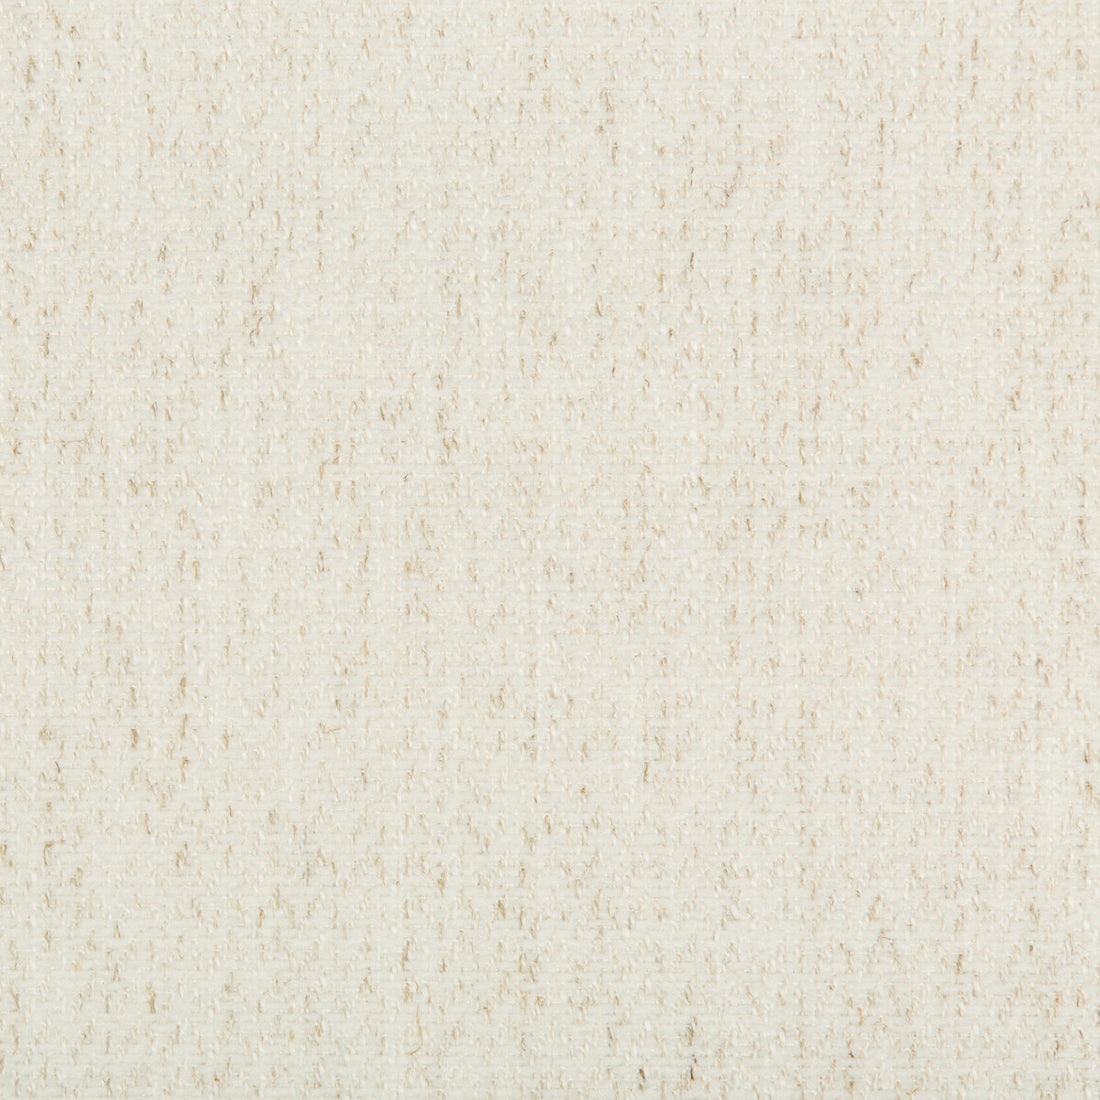 Kravet Smart fabric in 35394-1 color - pattern 35394.1.0 - by Kravet Smart in the Performance Crypton Home collection